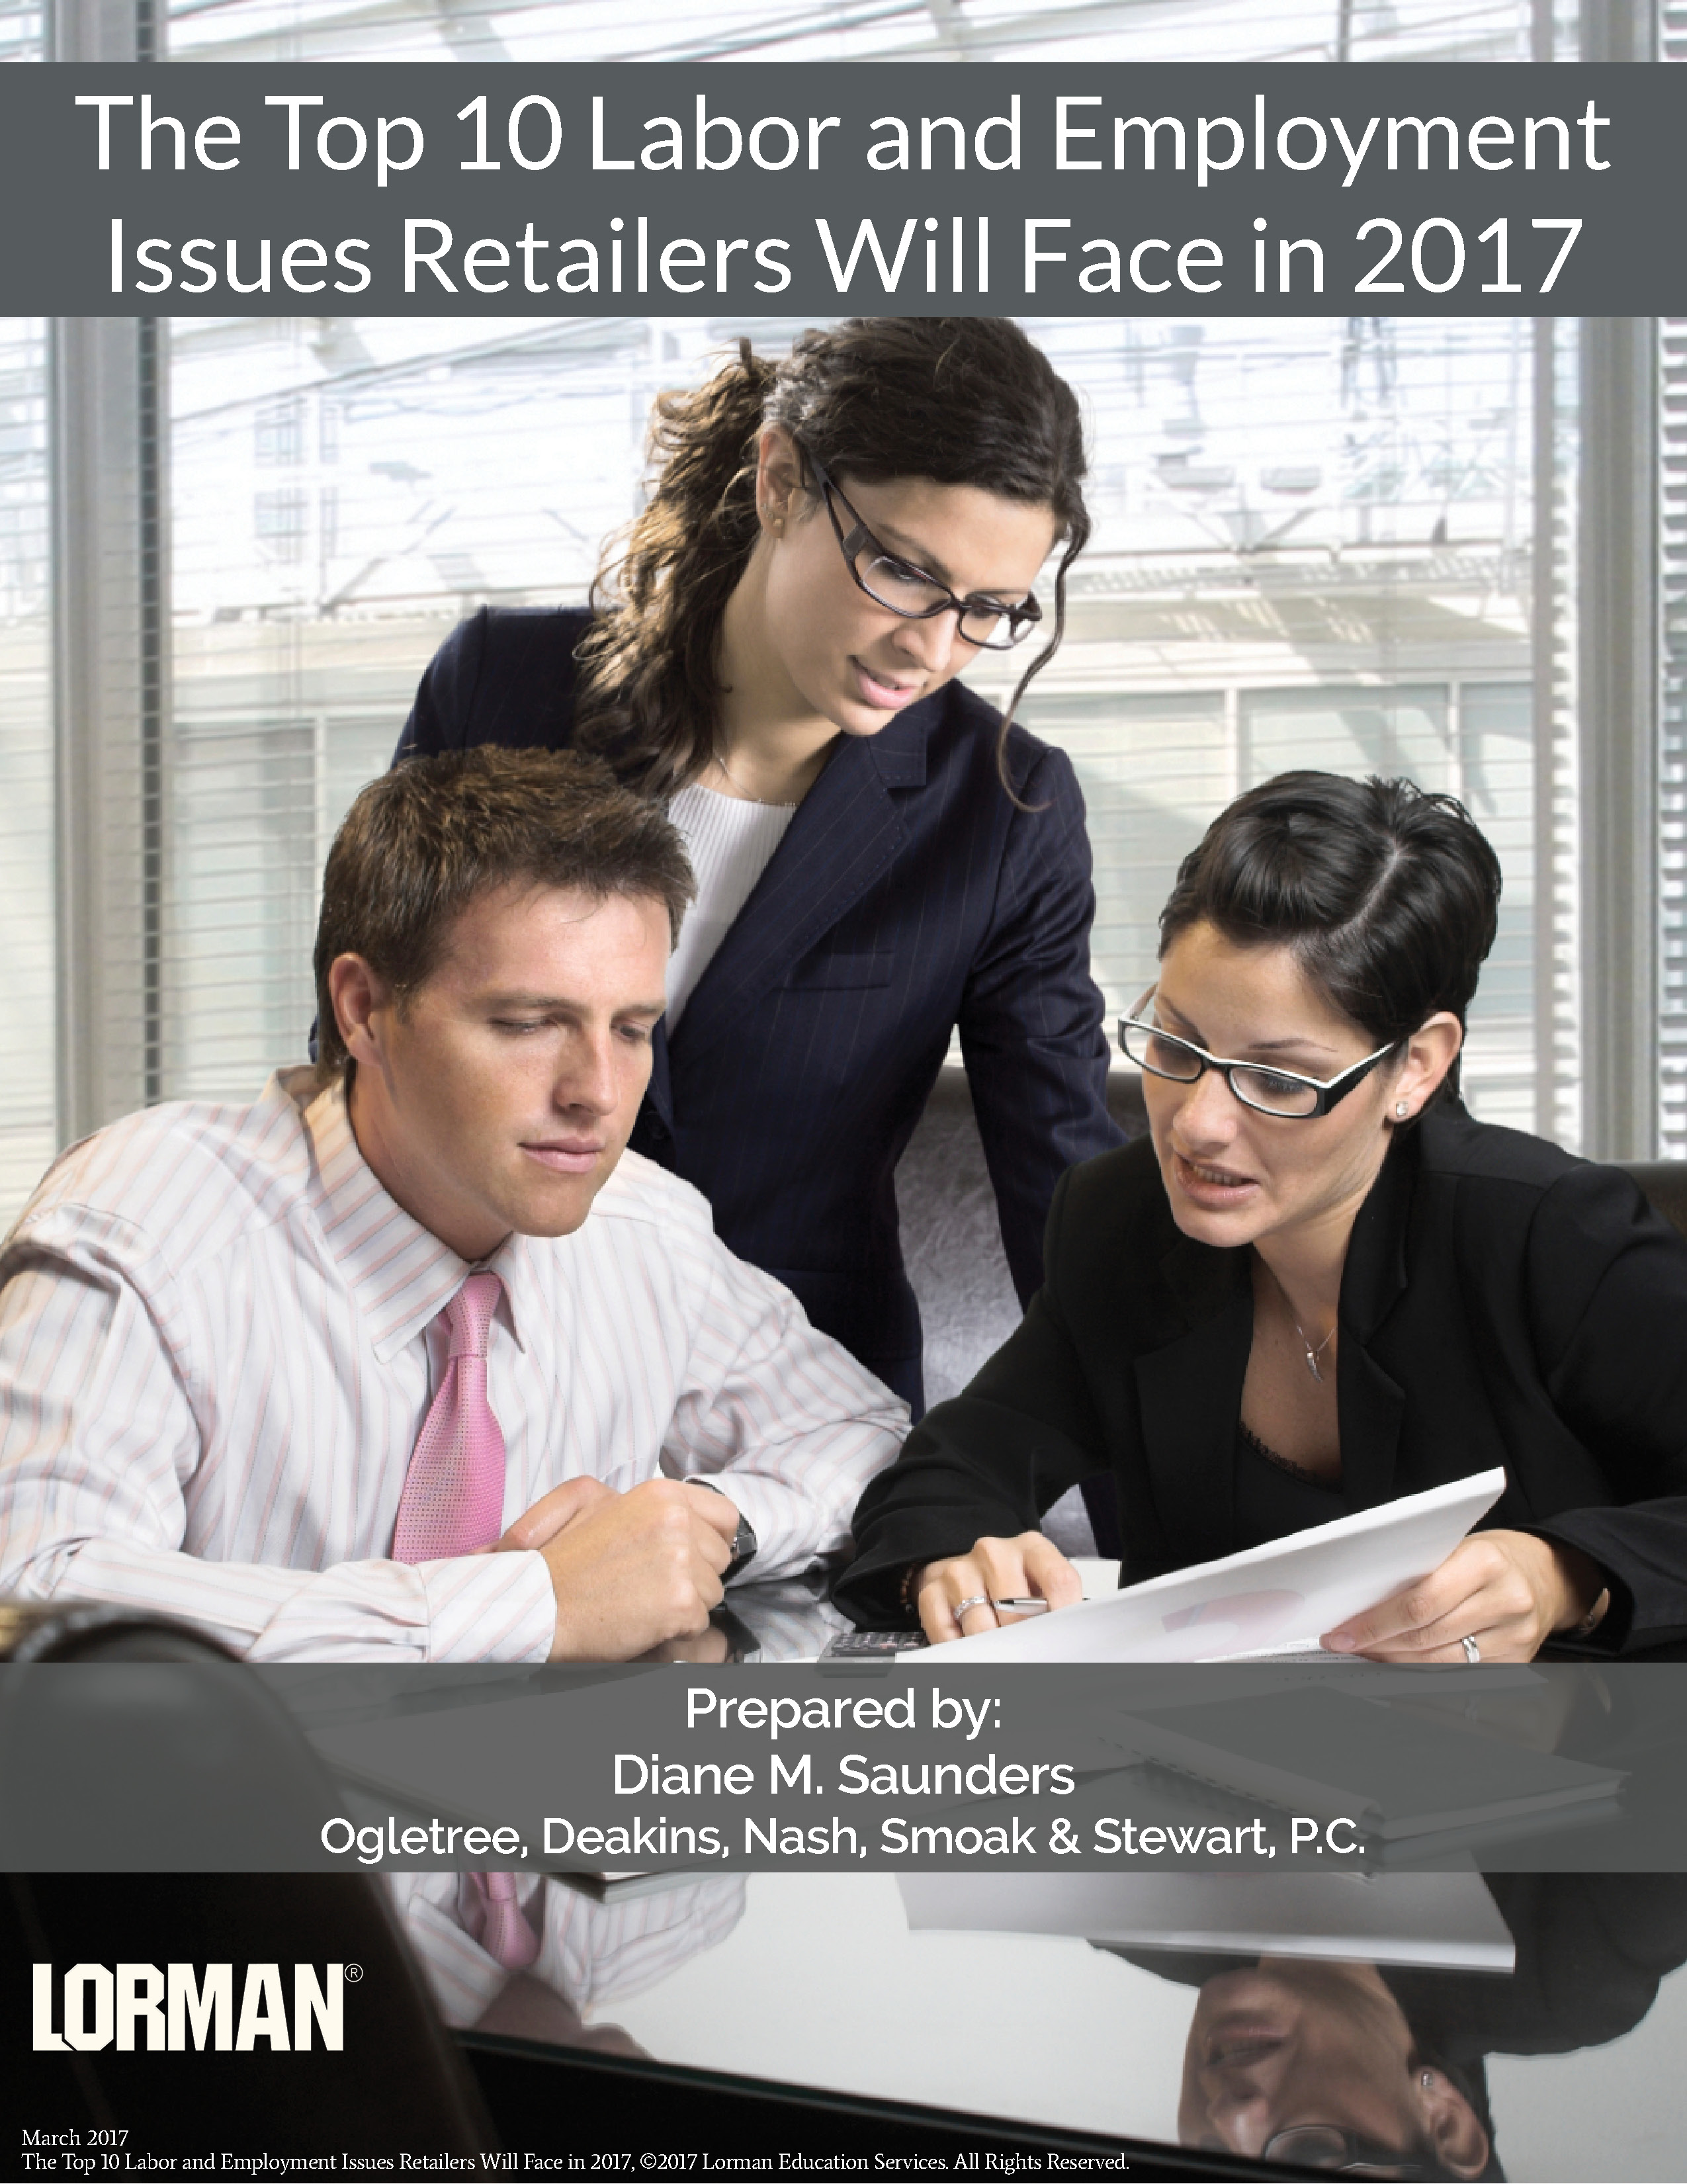 The Top 10 Labor and Employment Issues Retailers Will Face in 2017